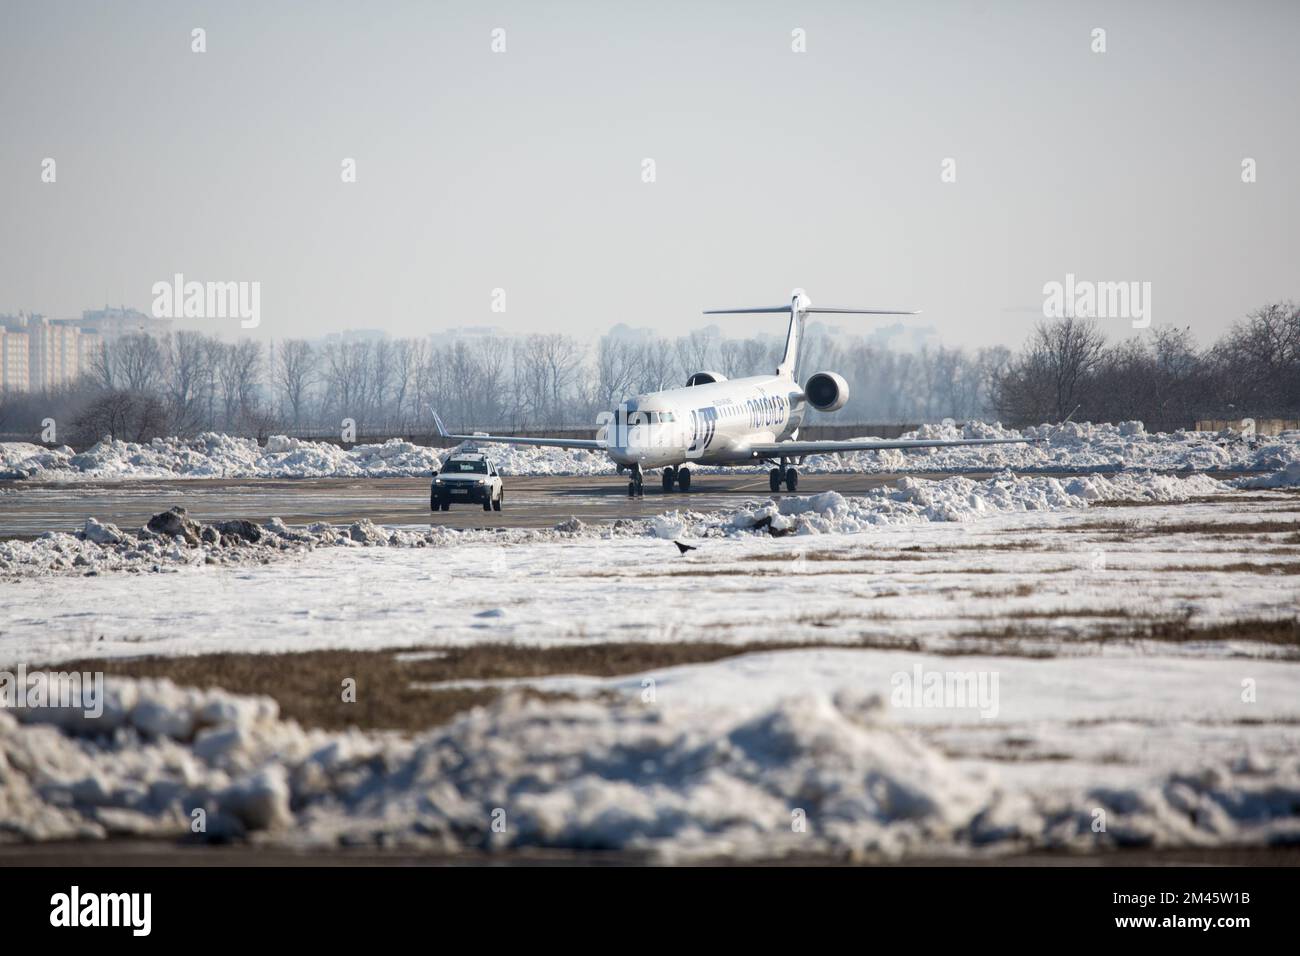 Odessa, Ukraine SIRCA 2018: Aircraft LOT with a Follow-me Car at airport in winter Stock Photo